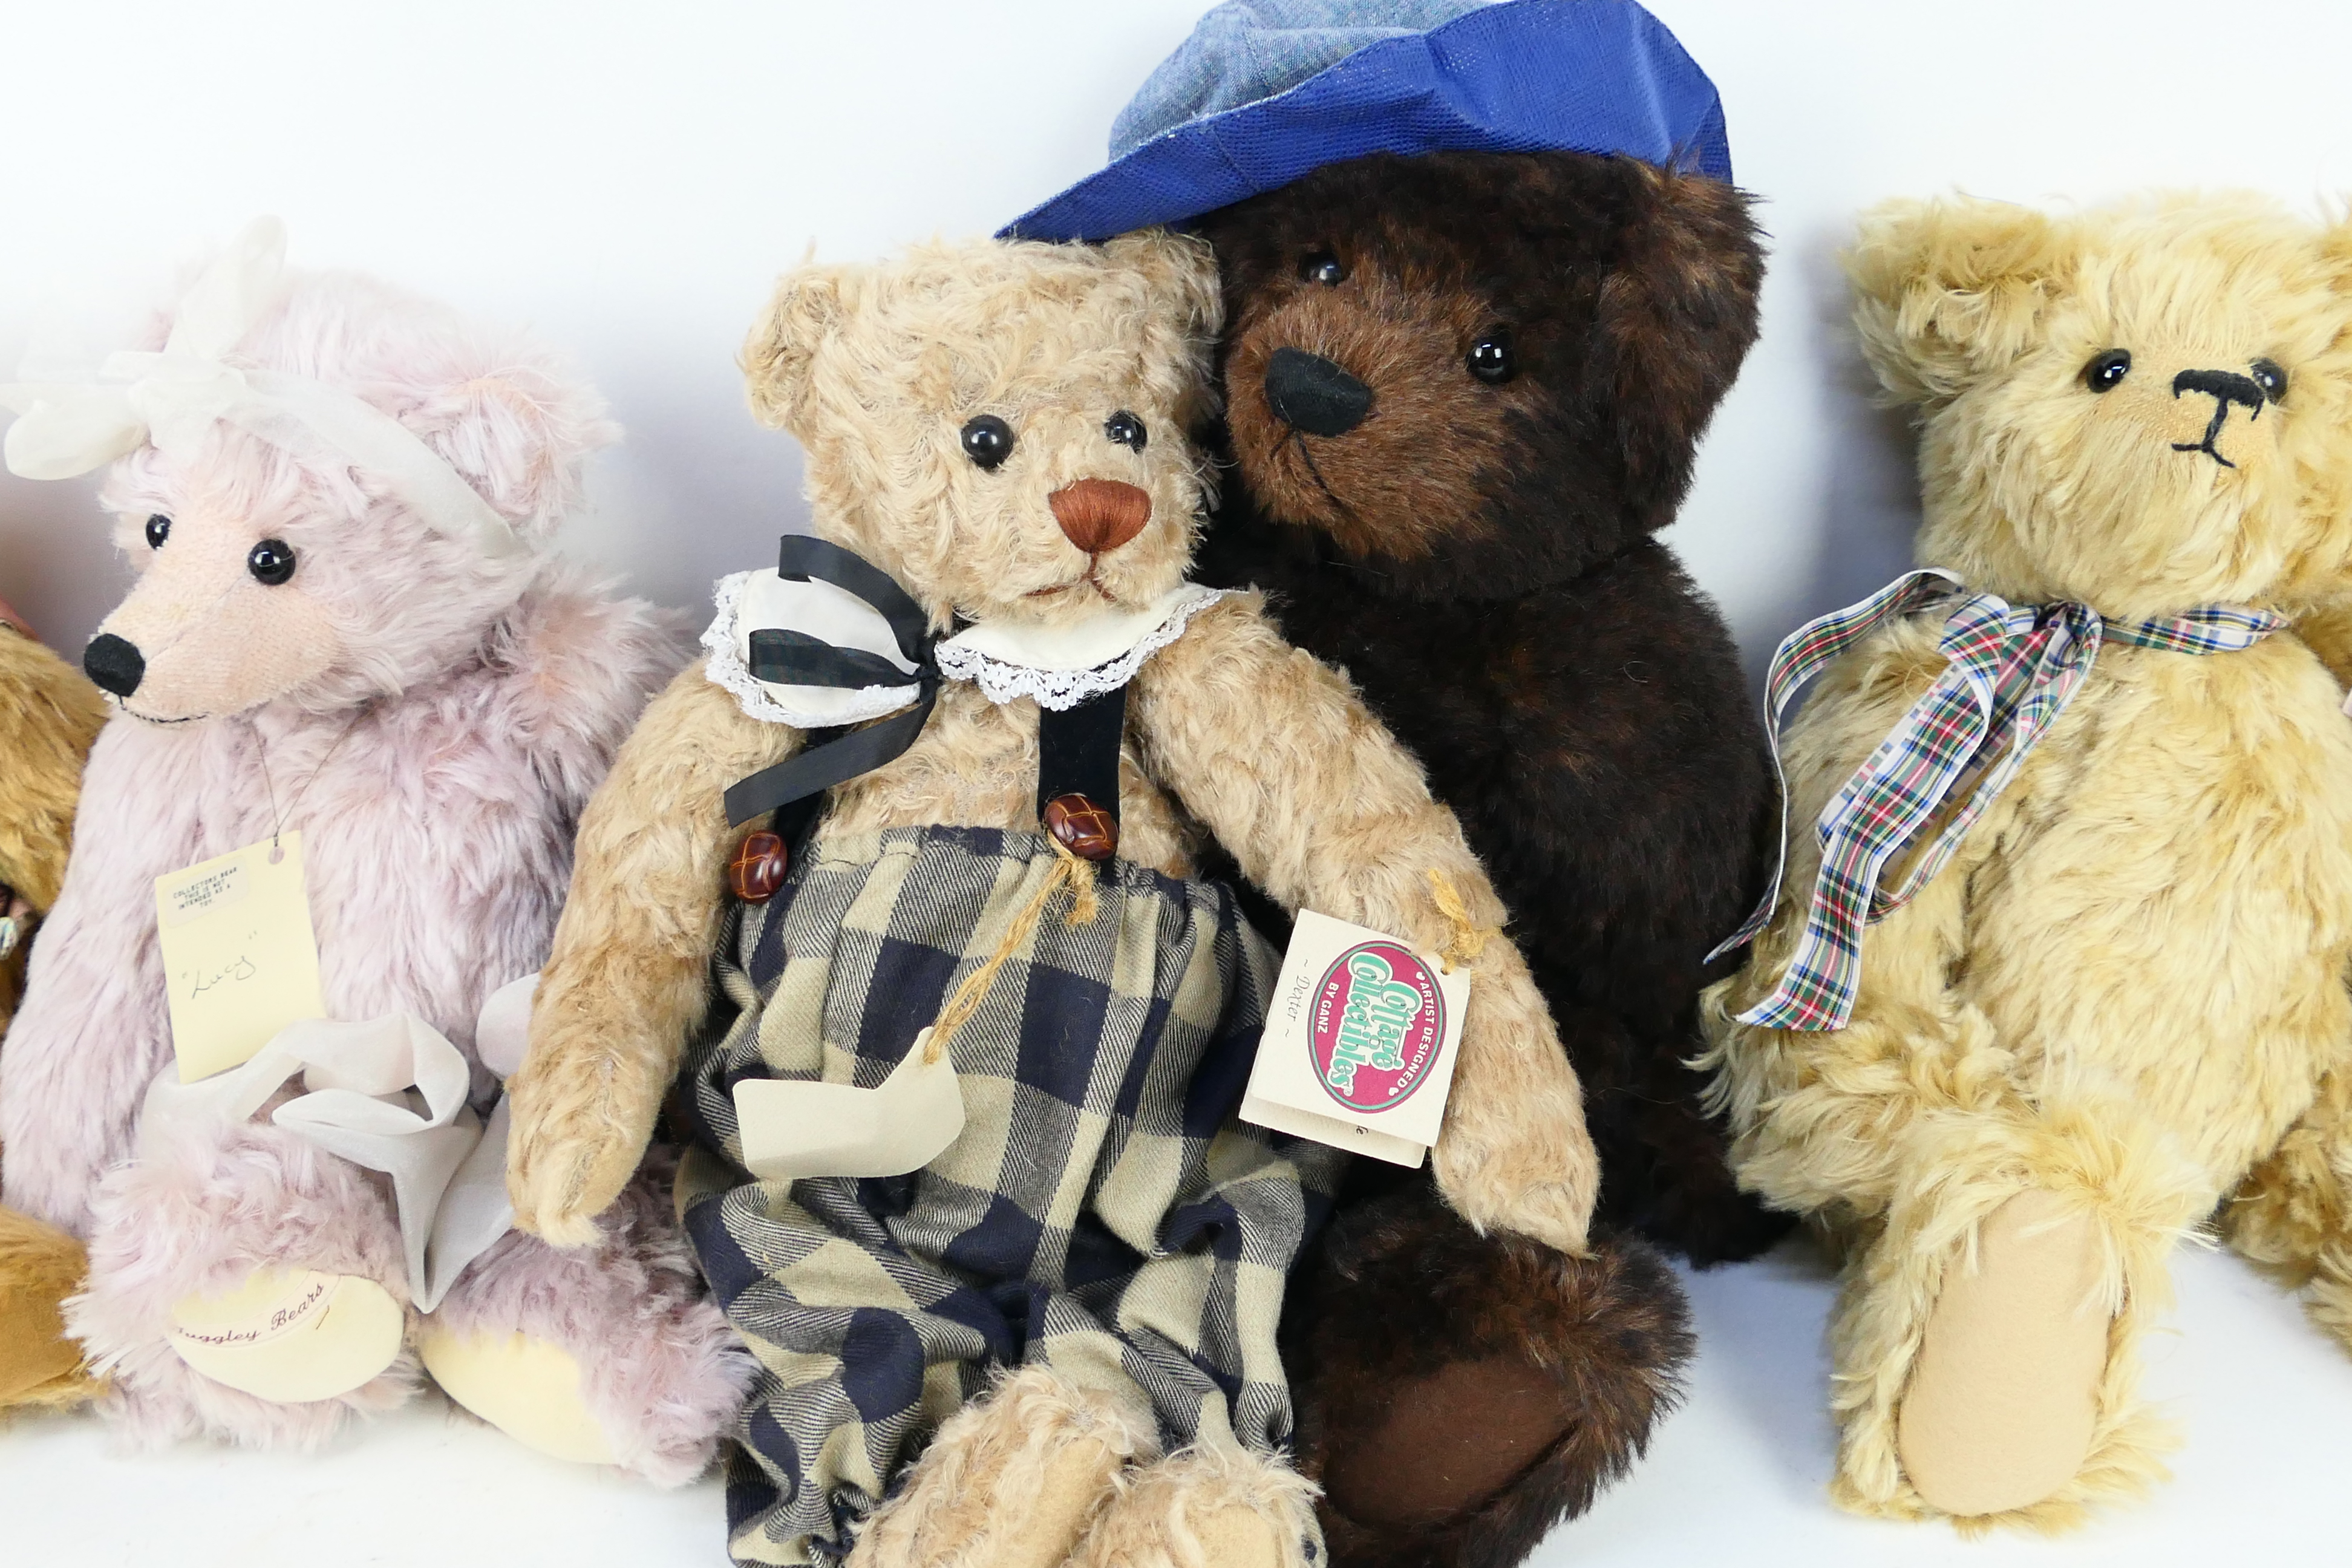 Bilbo Bears, Cottage Collectibles, The Teddy Bear Shop, DaDo Crafts, Juggley Bears, - Image 4 of 5